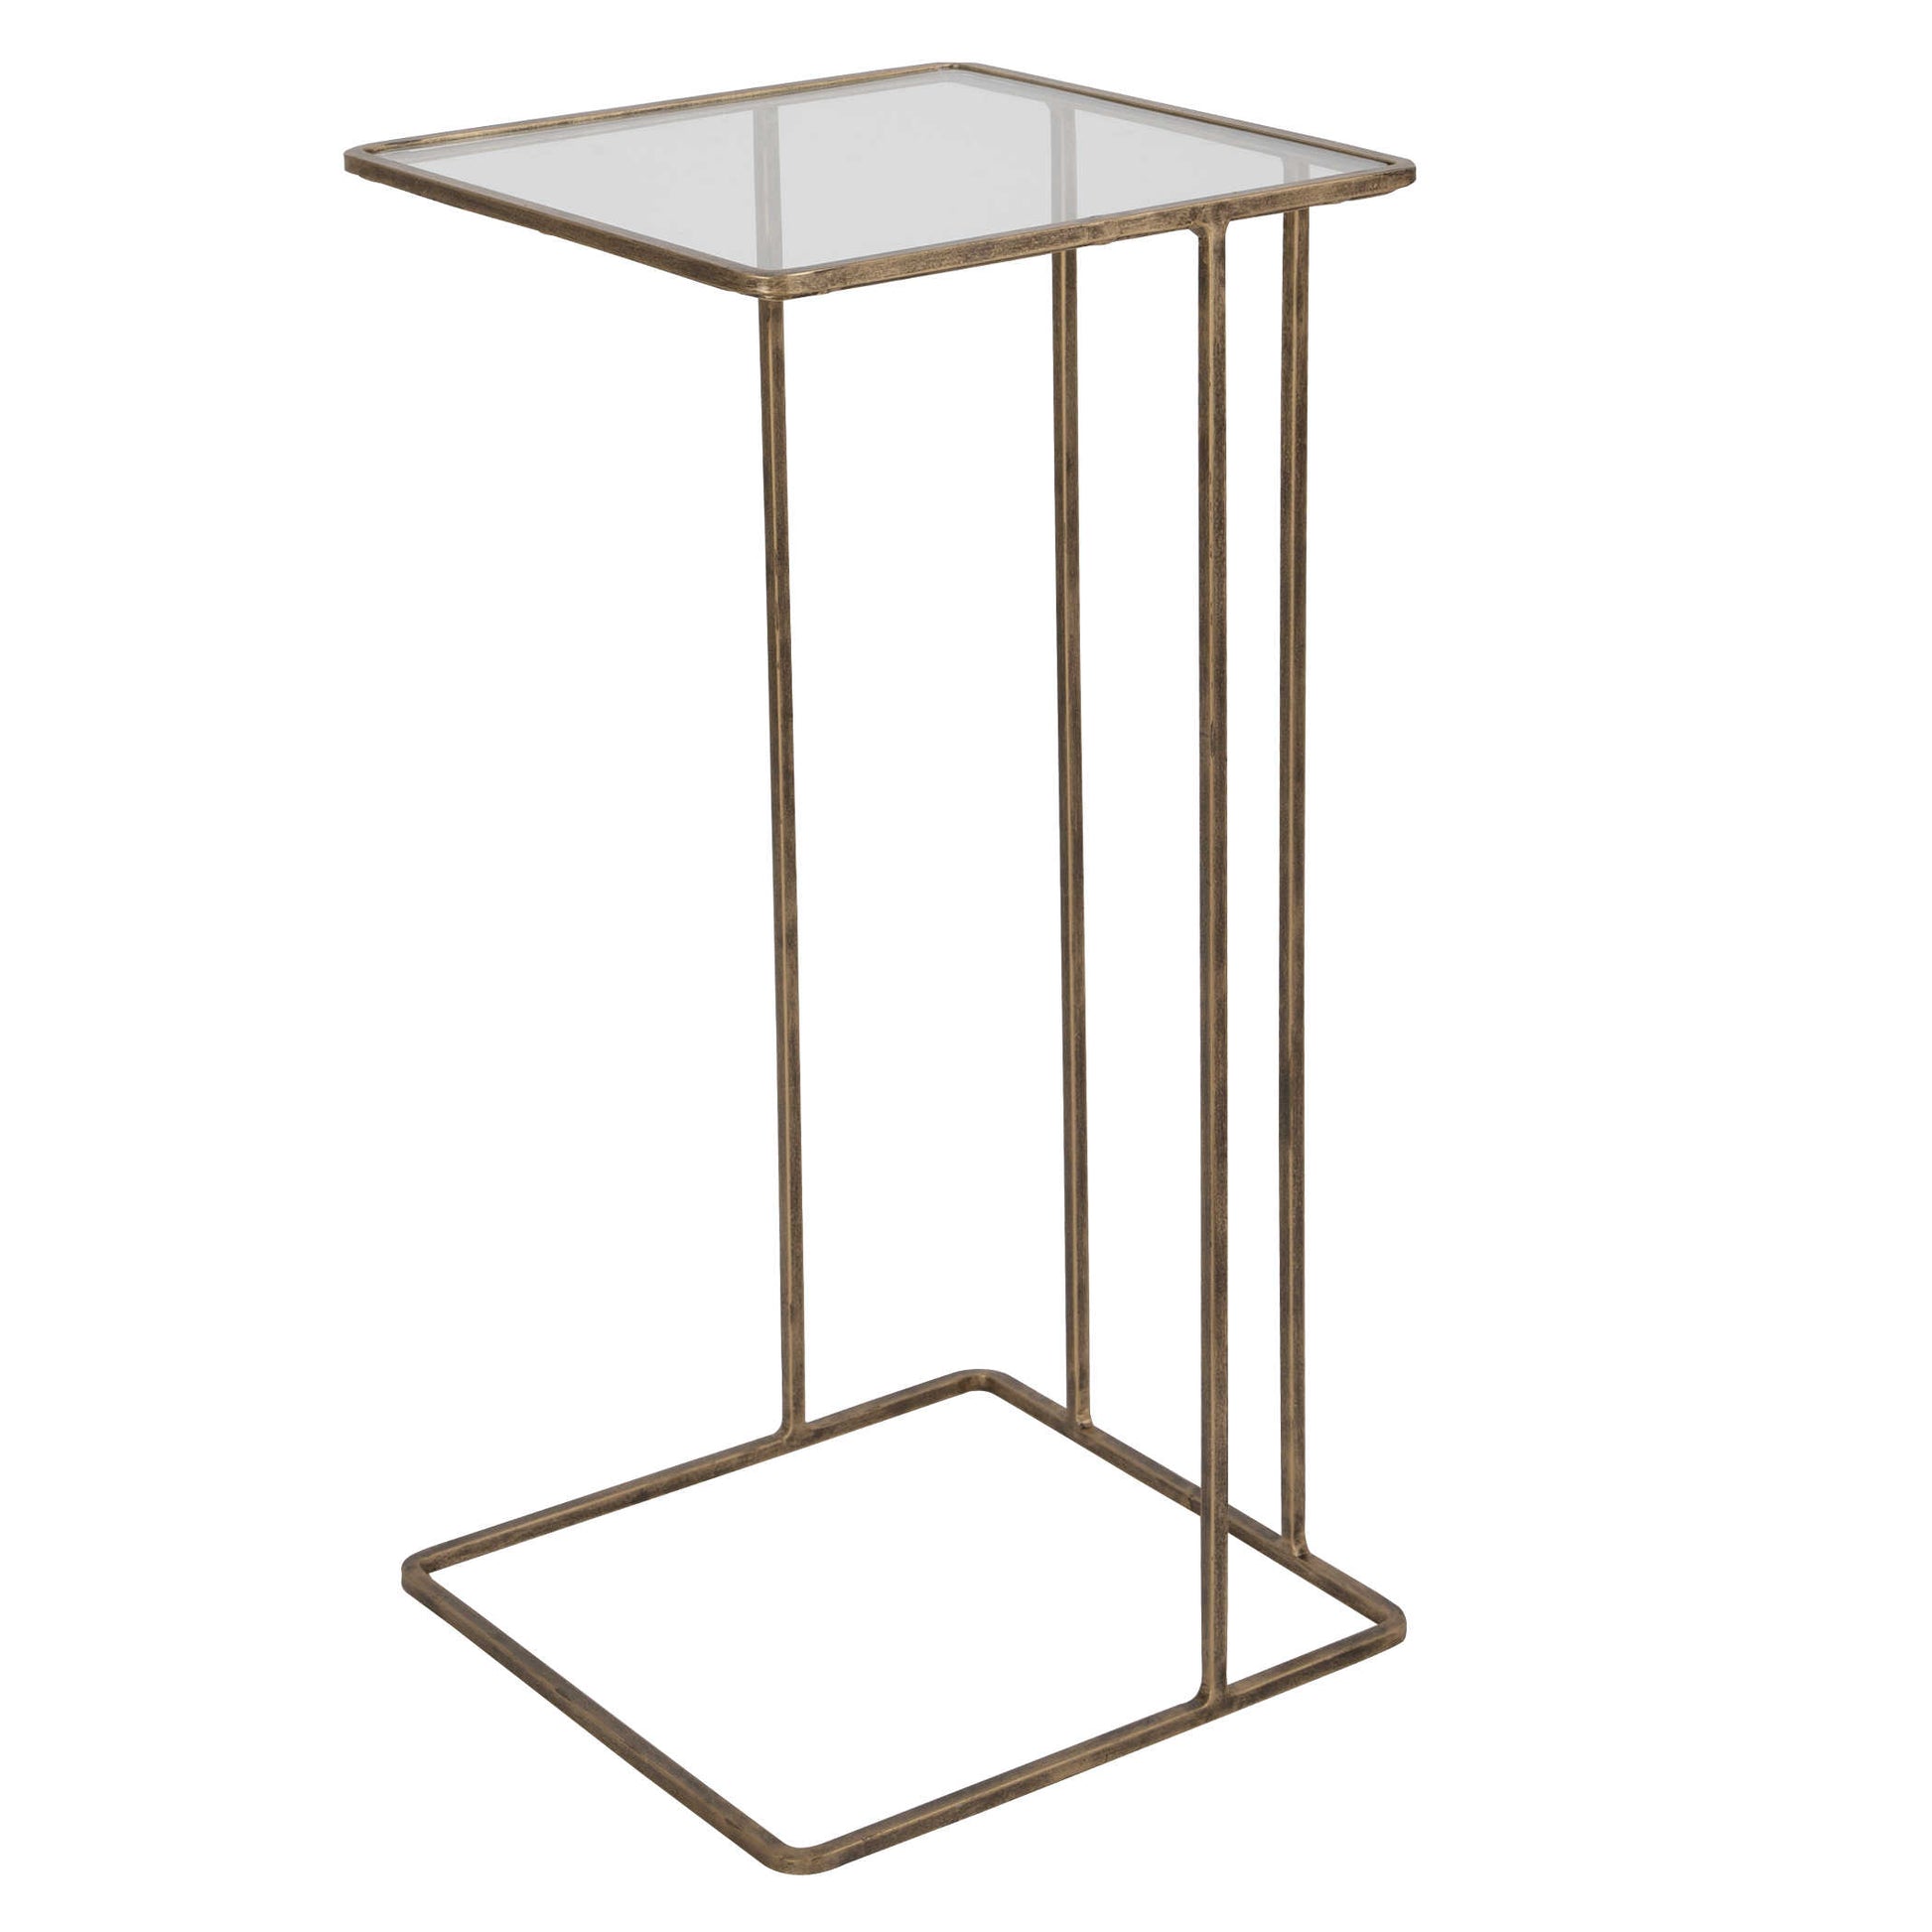 Diagonal view of a mirrored accent table with four legs and a square base. 